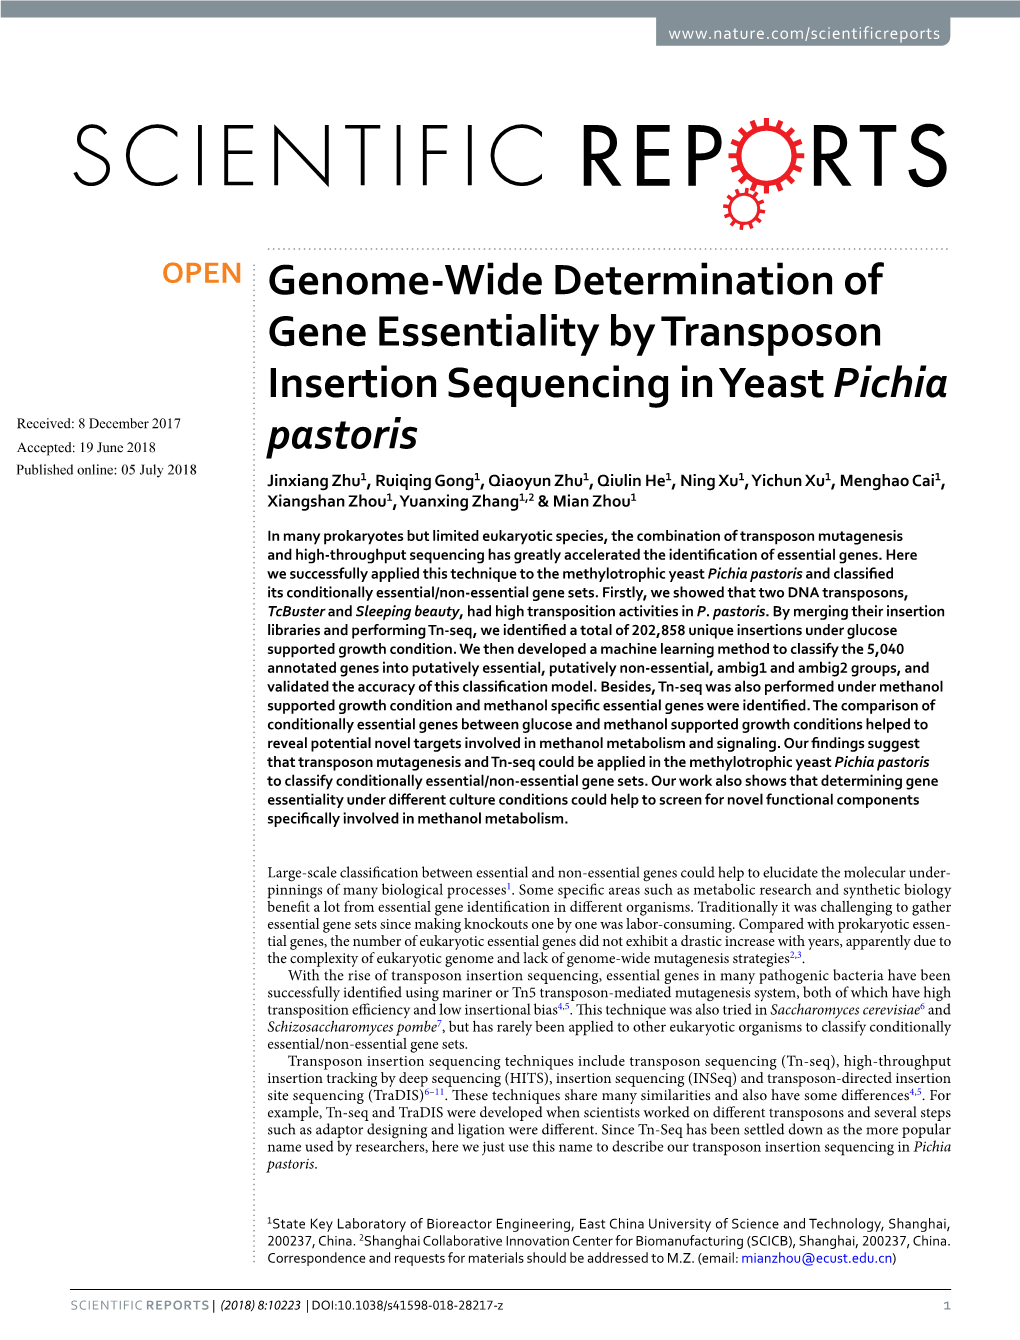 Genome-Wide Determination of Gene Essentiality by Transposon Insertion Sequencing in Yeast Pichia Pastoris